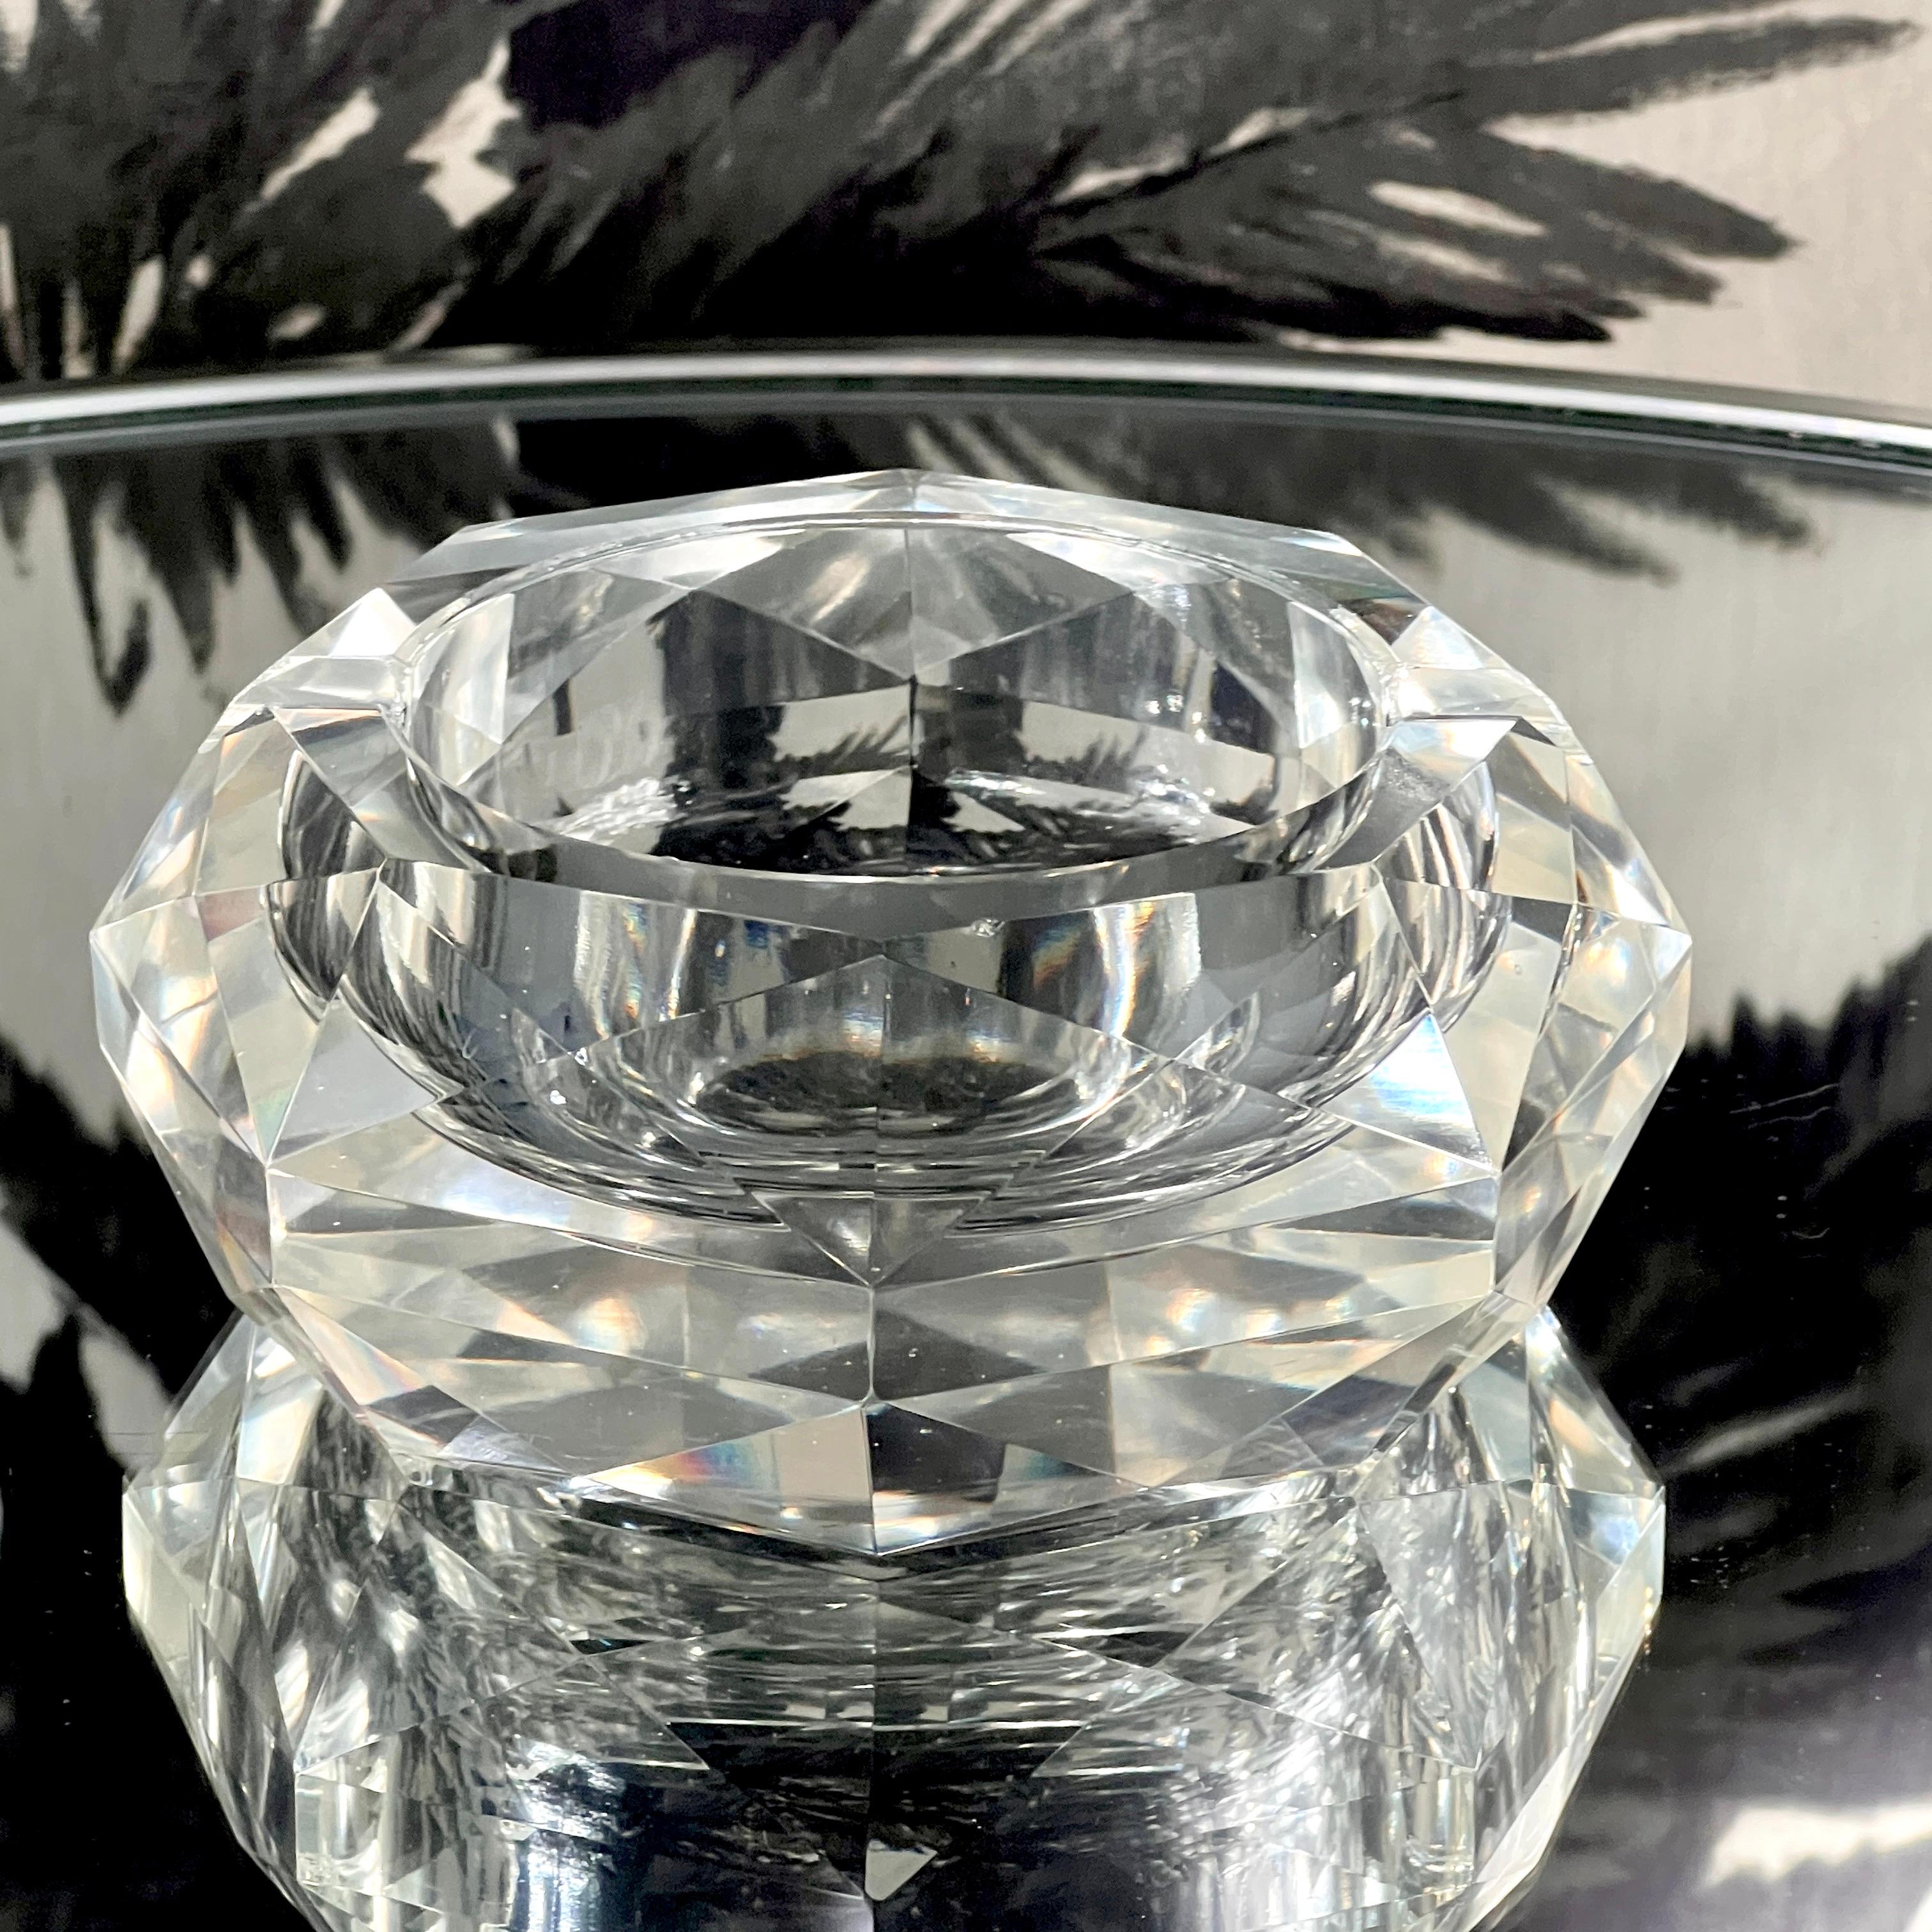 Mid-20th Century Faceted Crystal Ashtray with Diamond Prism Design, France, c. 1960s For Sale